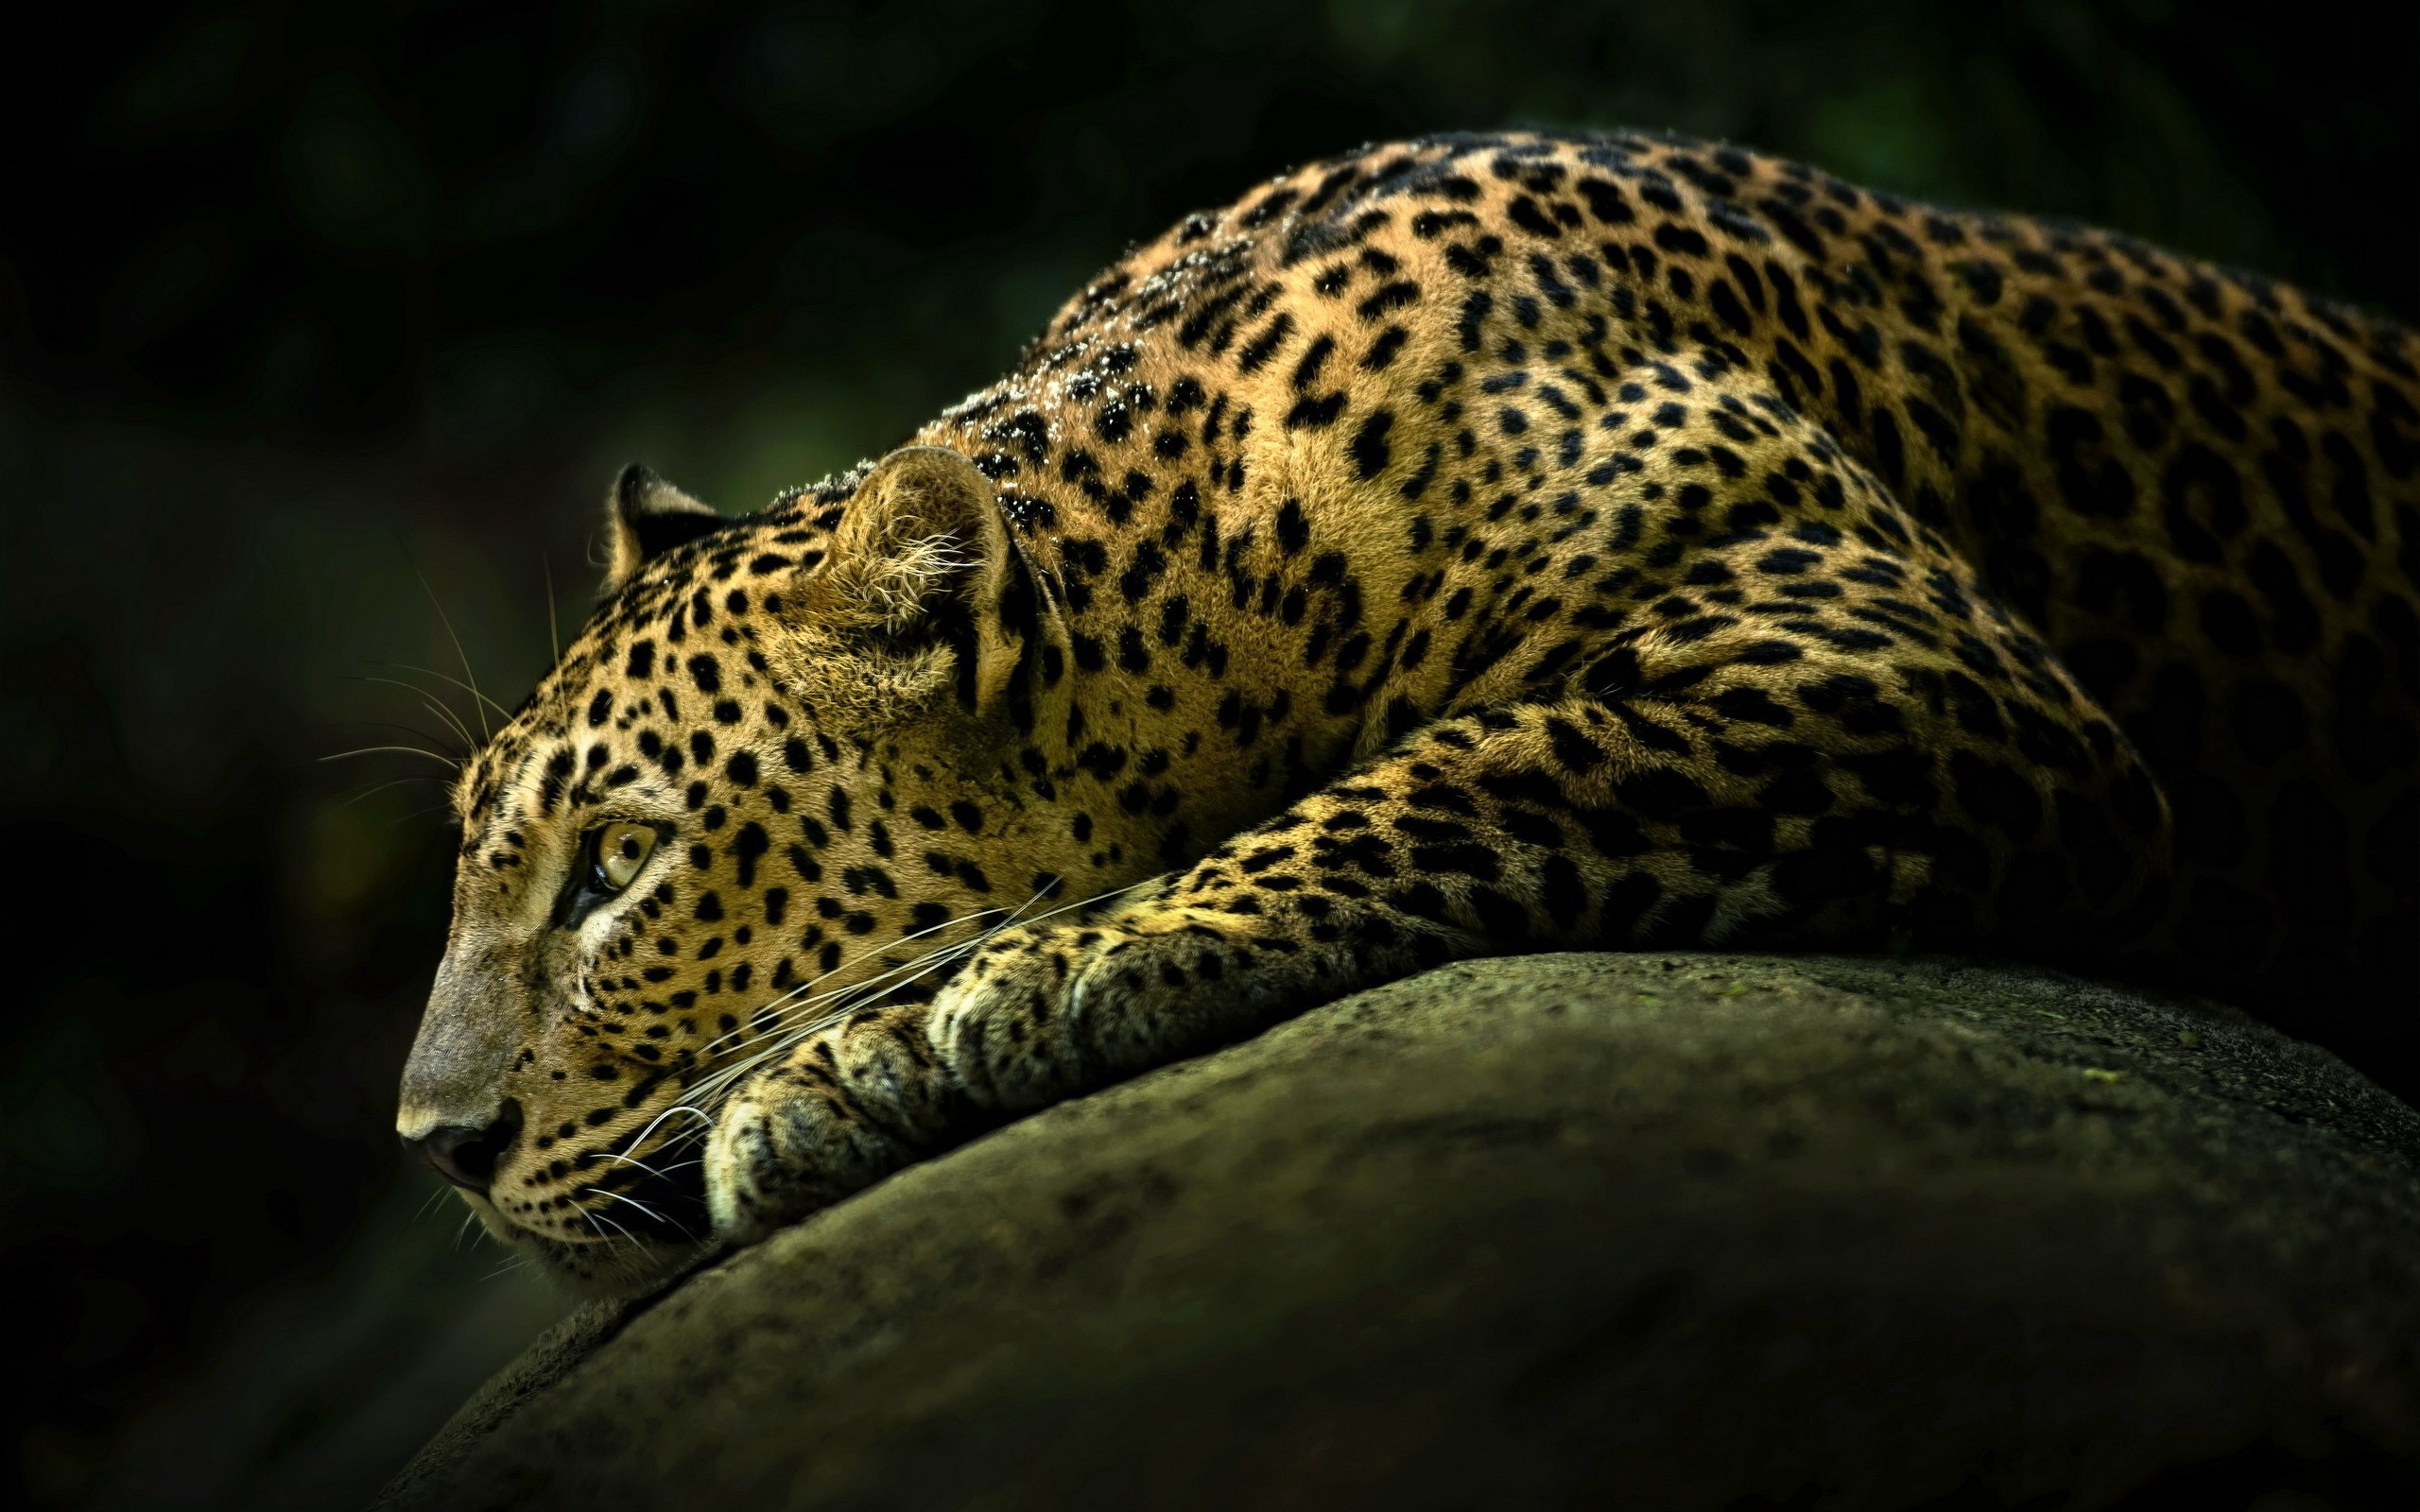 A leopard resting on a rock